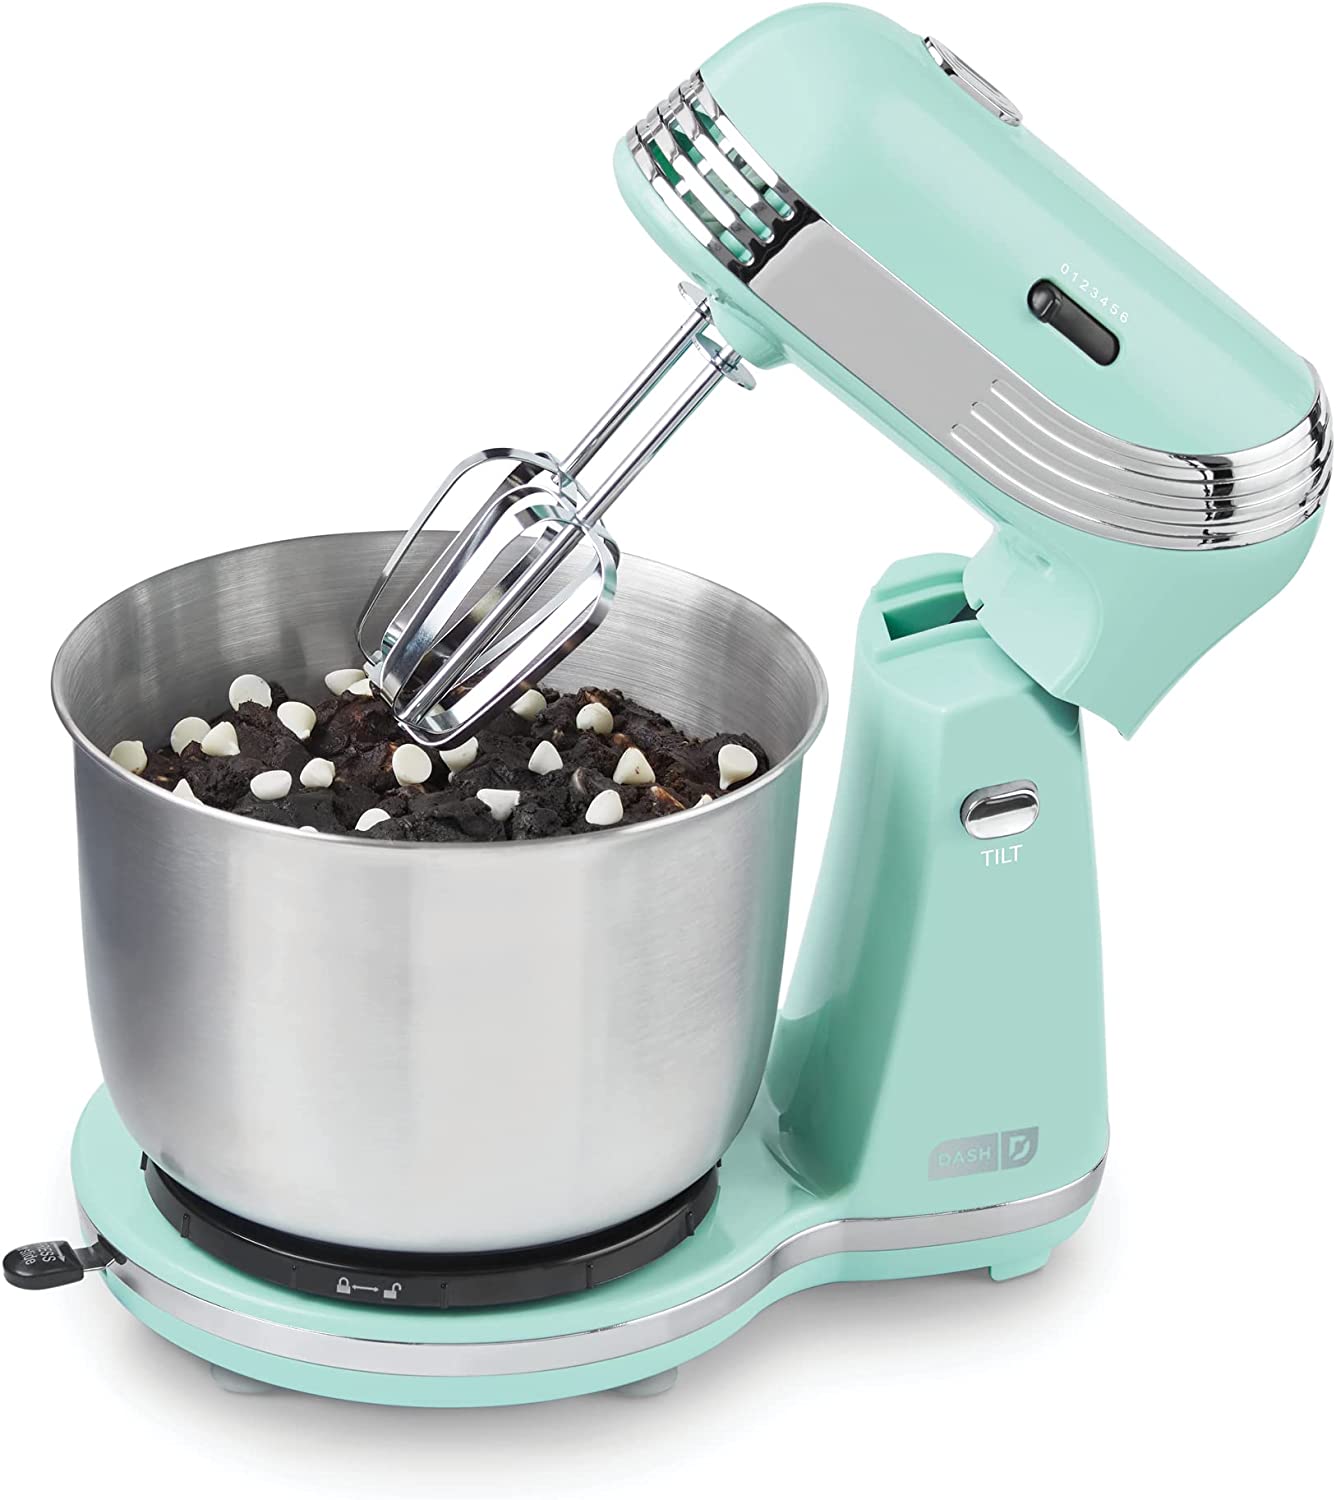 Kenmore Elite 6 Quart Bowl-Lift Stand Mixer with Timer